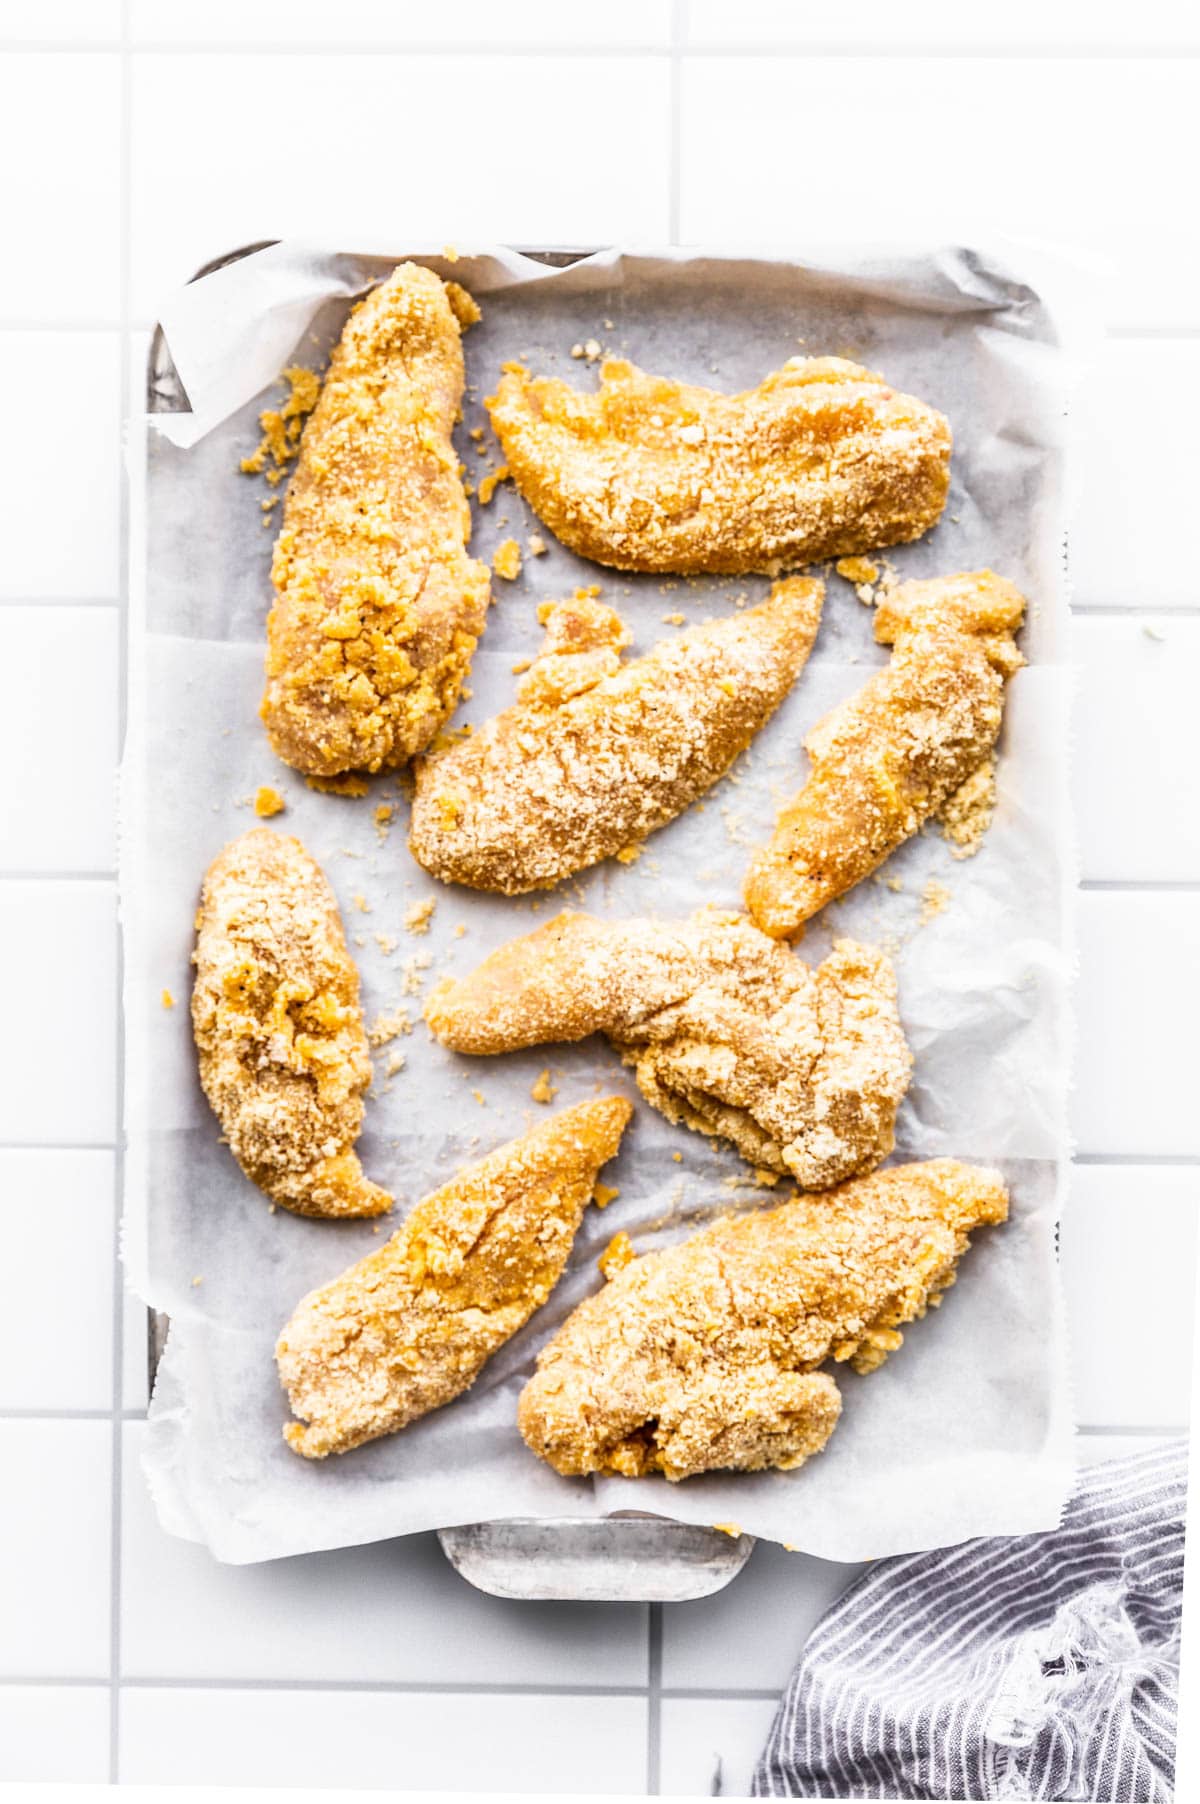 uncooked chicken tenders with breading on spread out on parchment covered baking sheet.